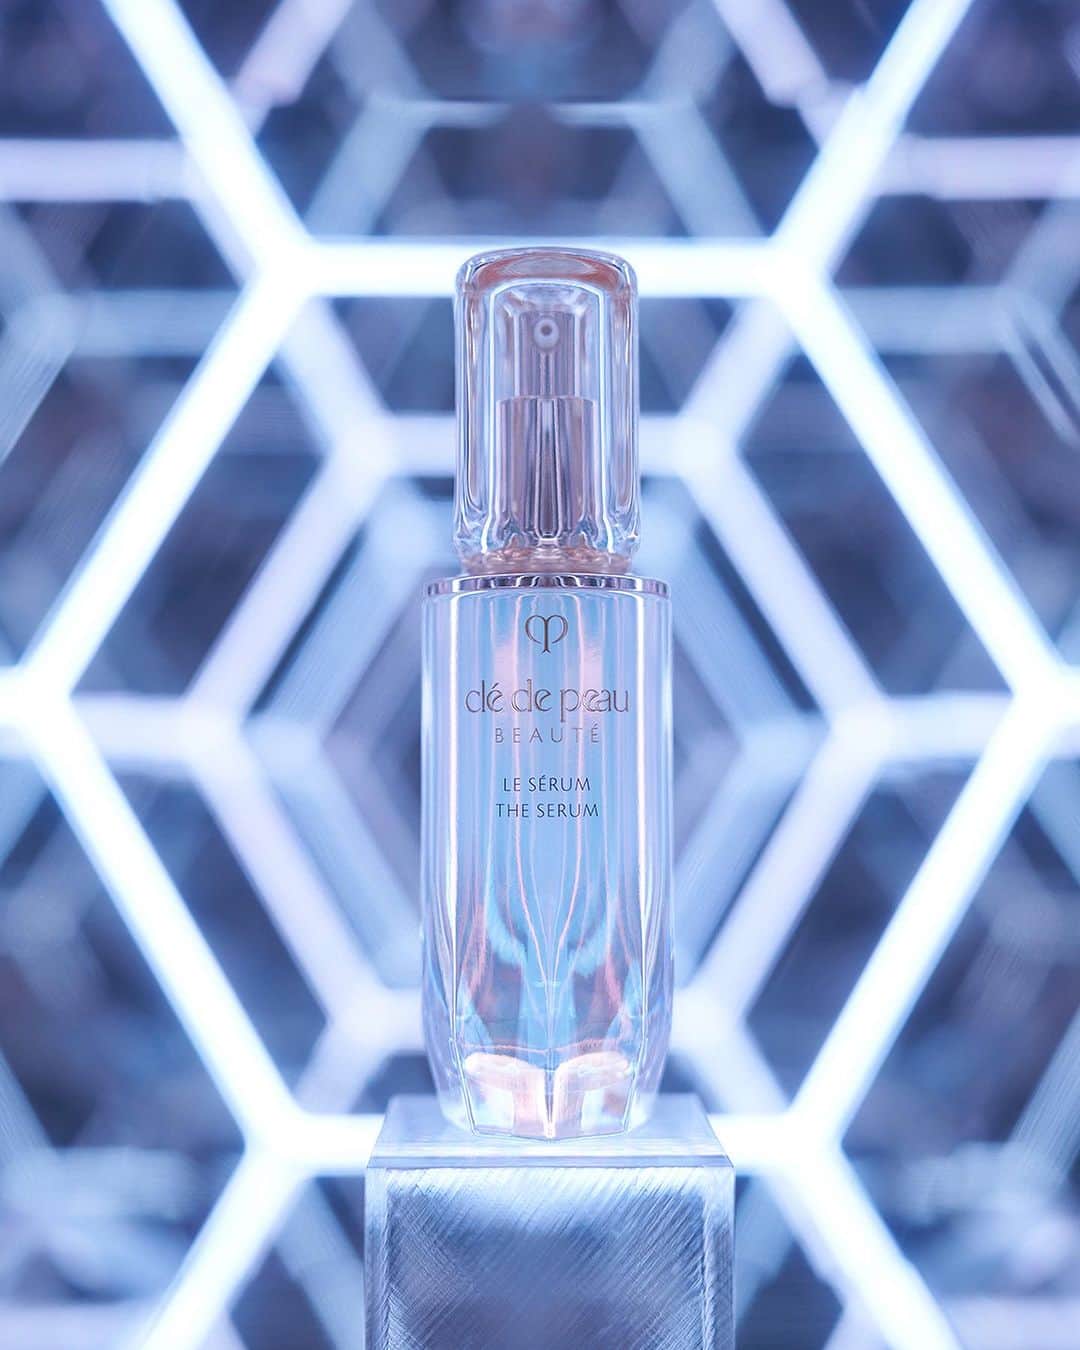 Clé de Peau Beauté Officialのインスタグラム：「Ever since its launch 10 years ago, #TheSerum has continuously won fans over with its luxurious and highly effective formulation. As the first step in the #KeyRadianceCare routine, The Serum activates #SkinIntelligence–your skin’s innate ability to distinguish between positive and negative stimuli–and sets the stage for the rest of your beauty ritual.   10年前の発売以来、輝きを生み出すセラムとしてファンの方々にご好評いただいているクレ・ド・ポー ボーテ #ルセラム （医薬部外品）。キーラディアンスケアの最初のステップであるル・セラムは、 #肌の知性 *に着目した独自成分、スキンイルミネイター（保湿・整肌）配合。瞬時に肌へなじみ、なめらかさを極めたふっくらやわらかな肌へ導きます。  *「肌の知性」とは、すべての人が生まれながらにそなえている、生涯美しい輝きを保ち続けるための鍵です。」